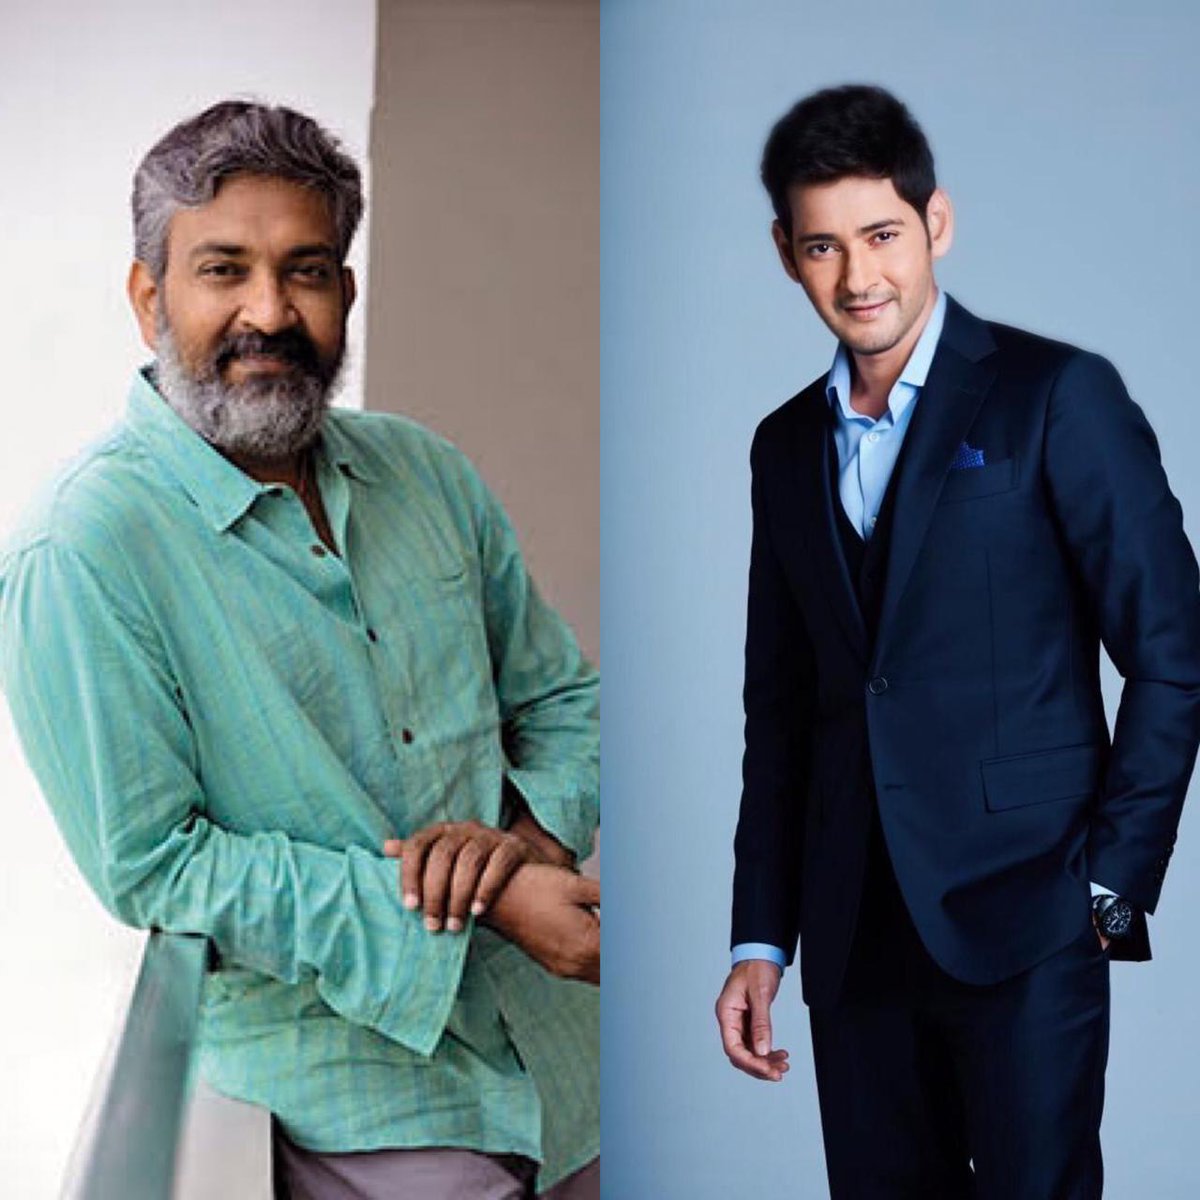 BIGGG NEWS... #Telugu superstar #MaheshBabu and director #SSRajamouli to collaborate... #Mahesh will star in #Rajamouli's next directorial, after #RRR... Produced by KL Narayana... Will go on floors in 2022.